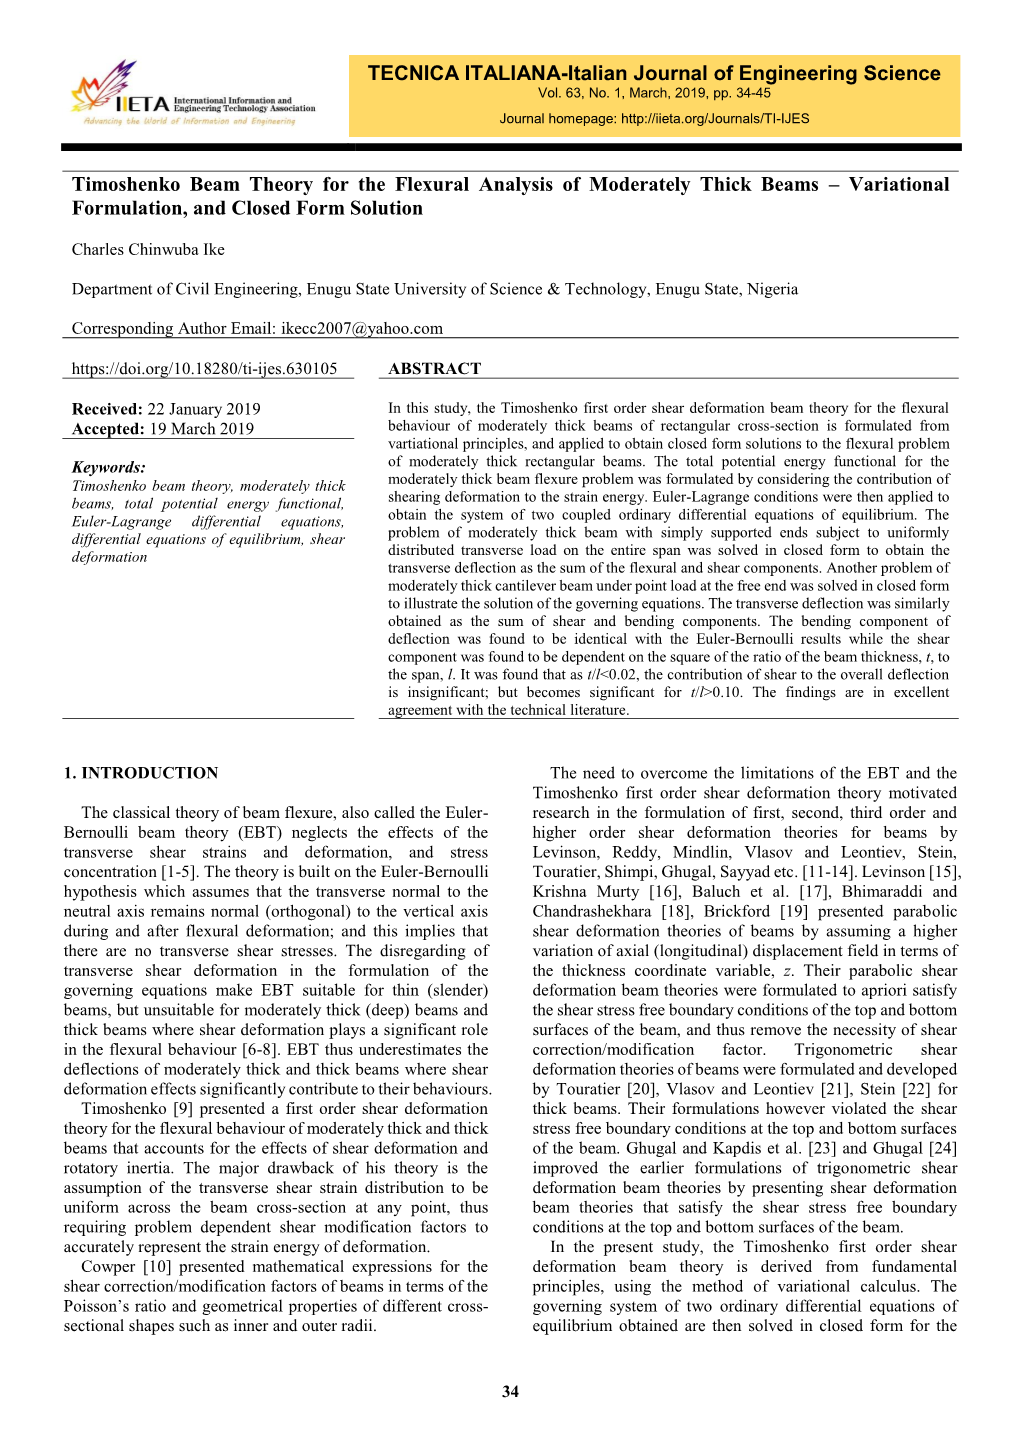 Timoshenko Beam Theory for the Flexural Analysis of Moderately Thick Beams – Variational Formulation, and Closed Form Solution